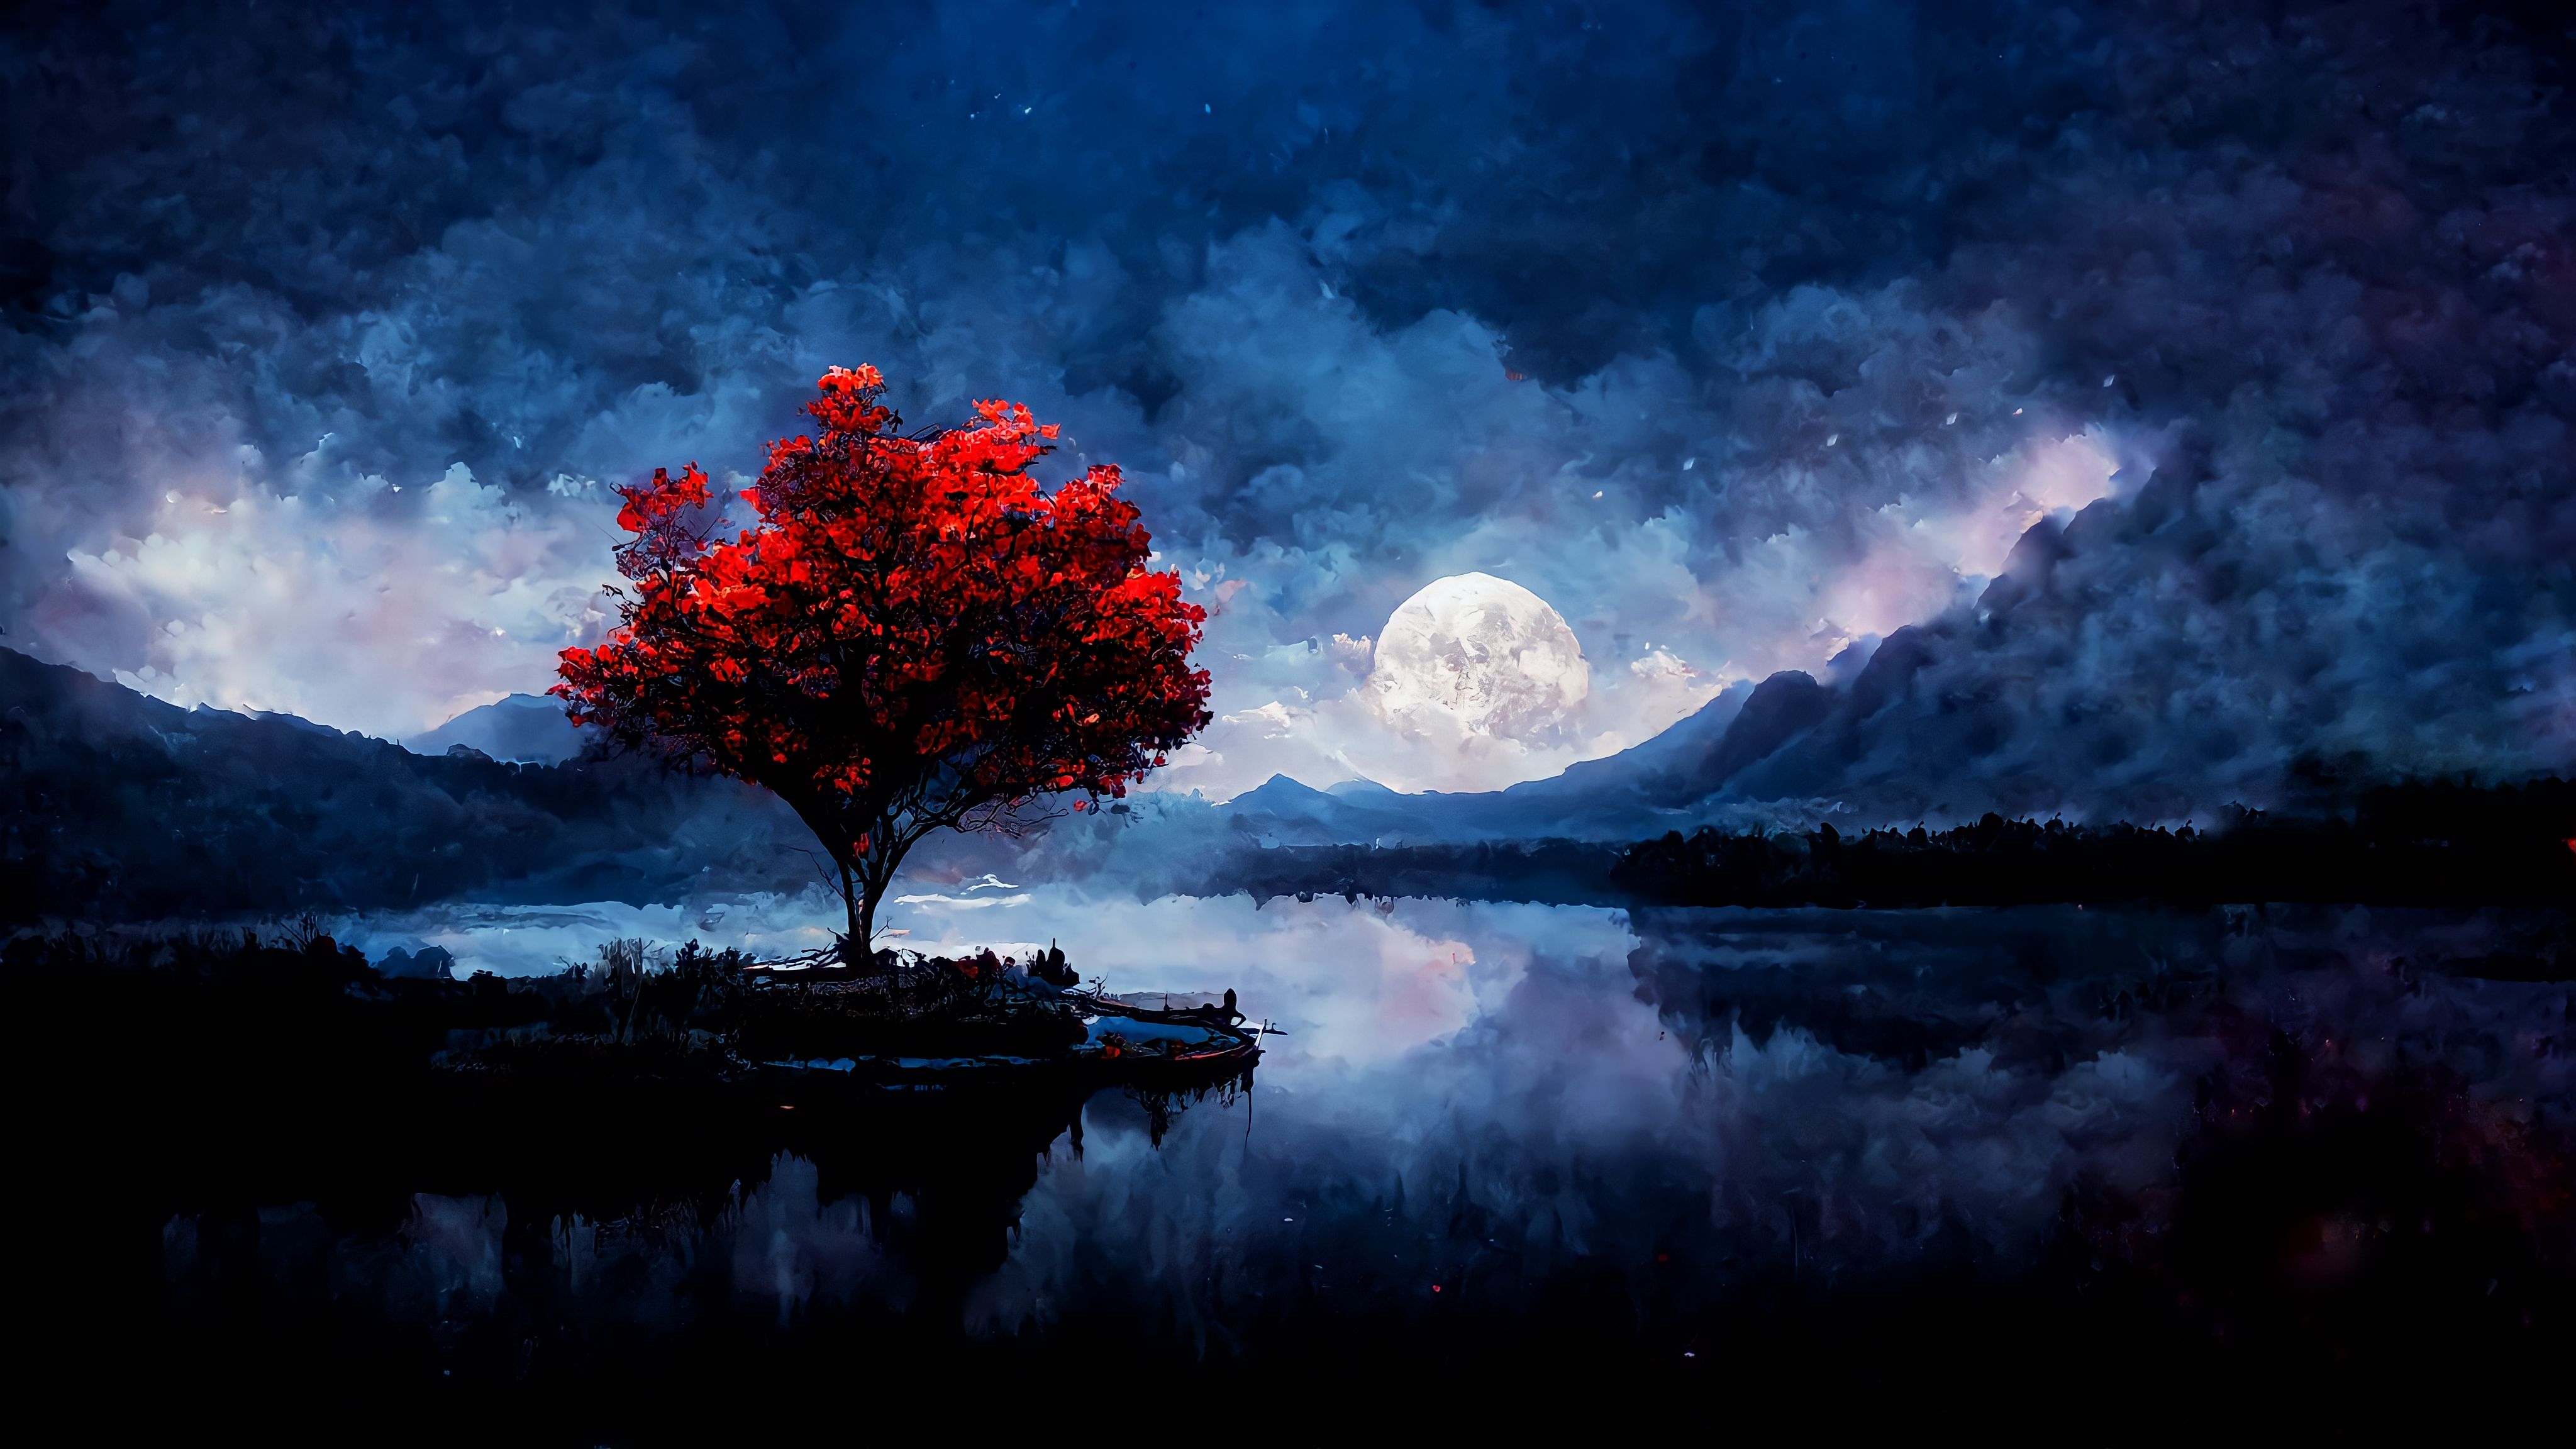 General 4096x2304 red trees full moon landscape matte painting ArtStation AI art lake mountains nature clouds water Moon